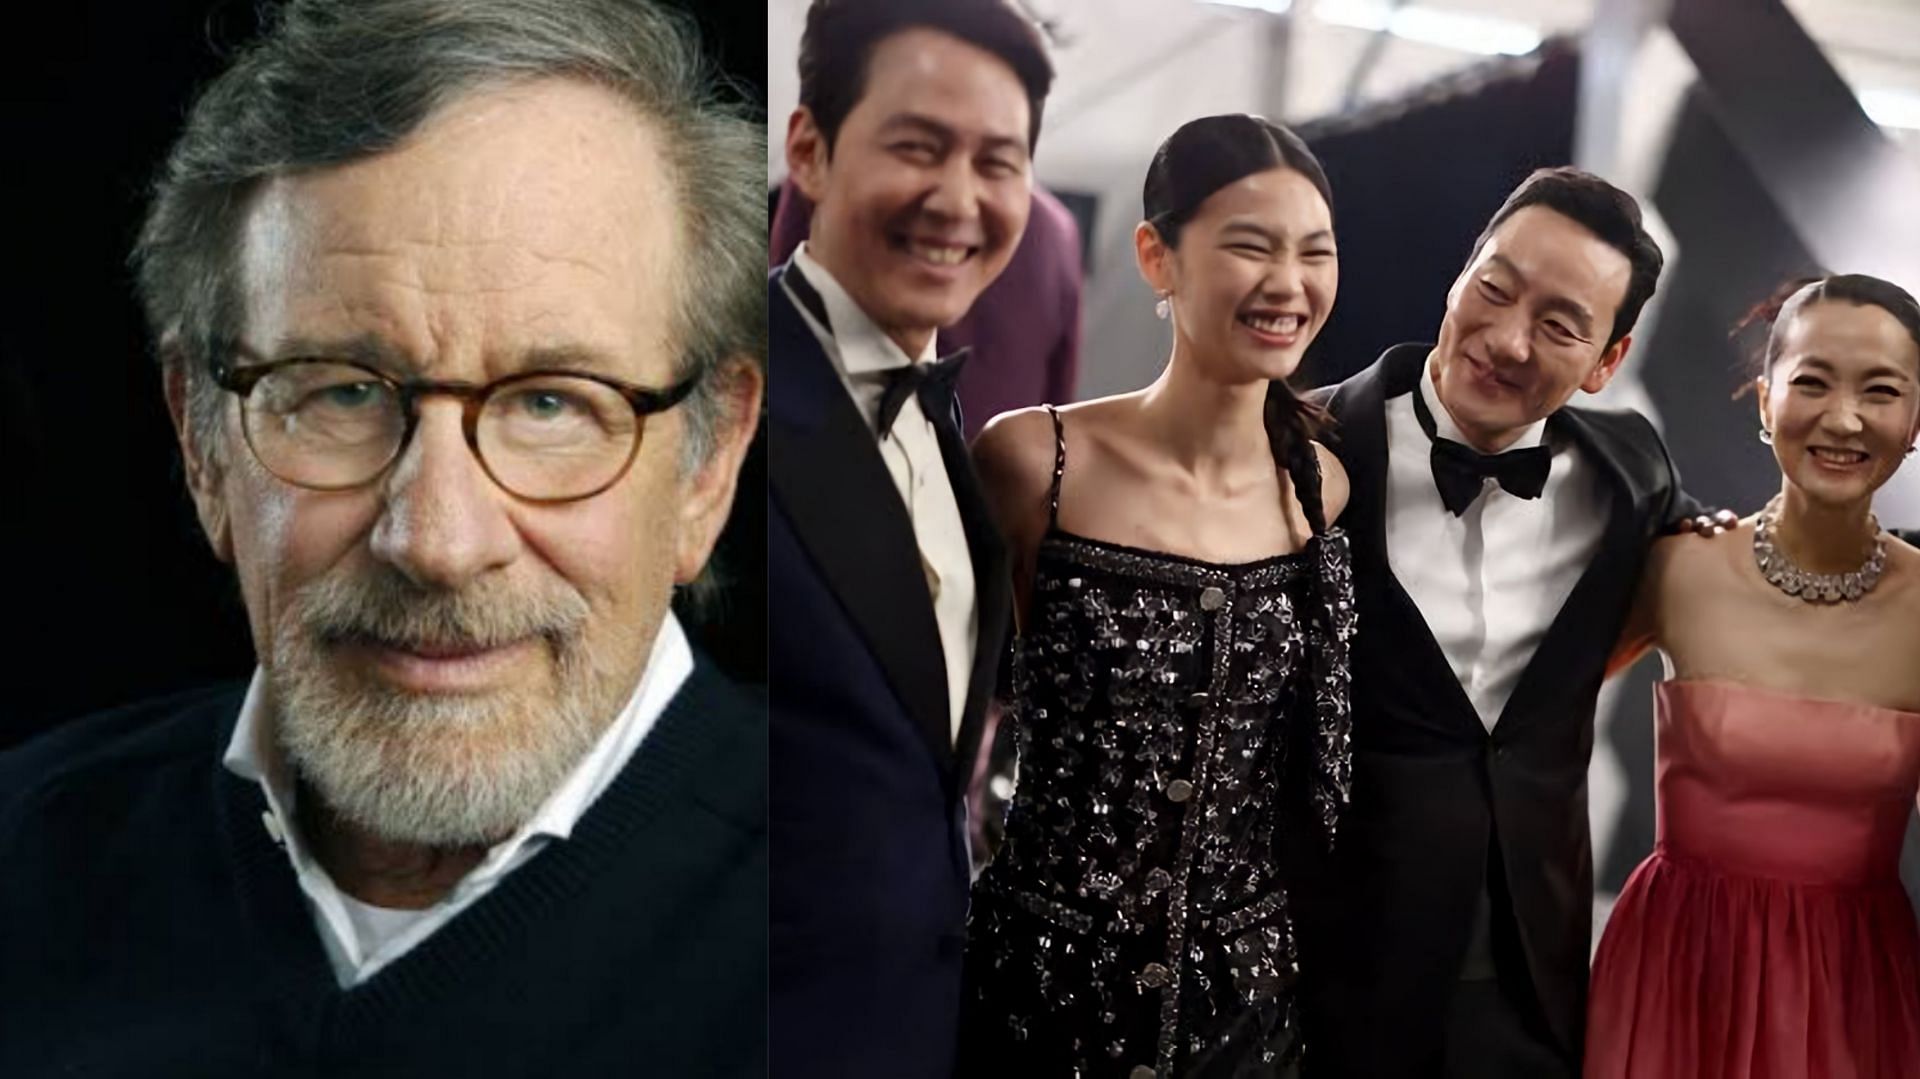 Steven Spielberg is receiving criticism for his comments (Image via Wiki, SAG Awards)